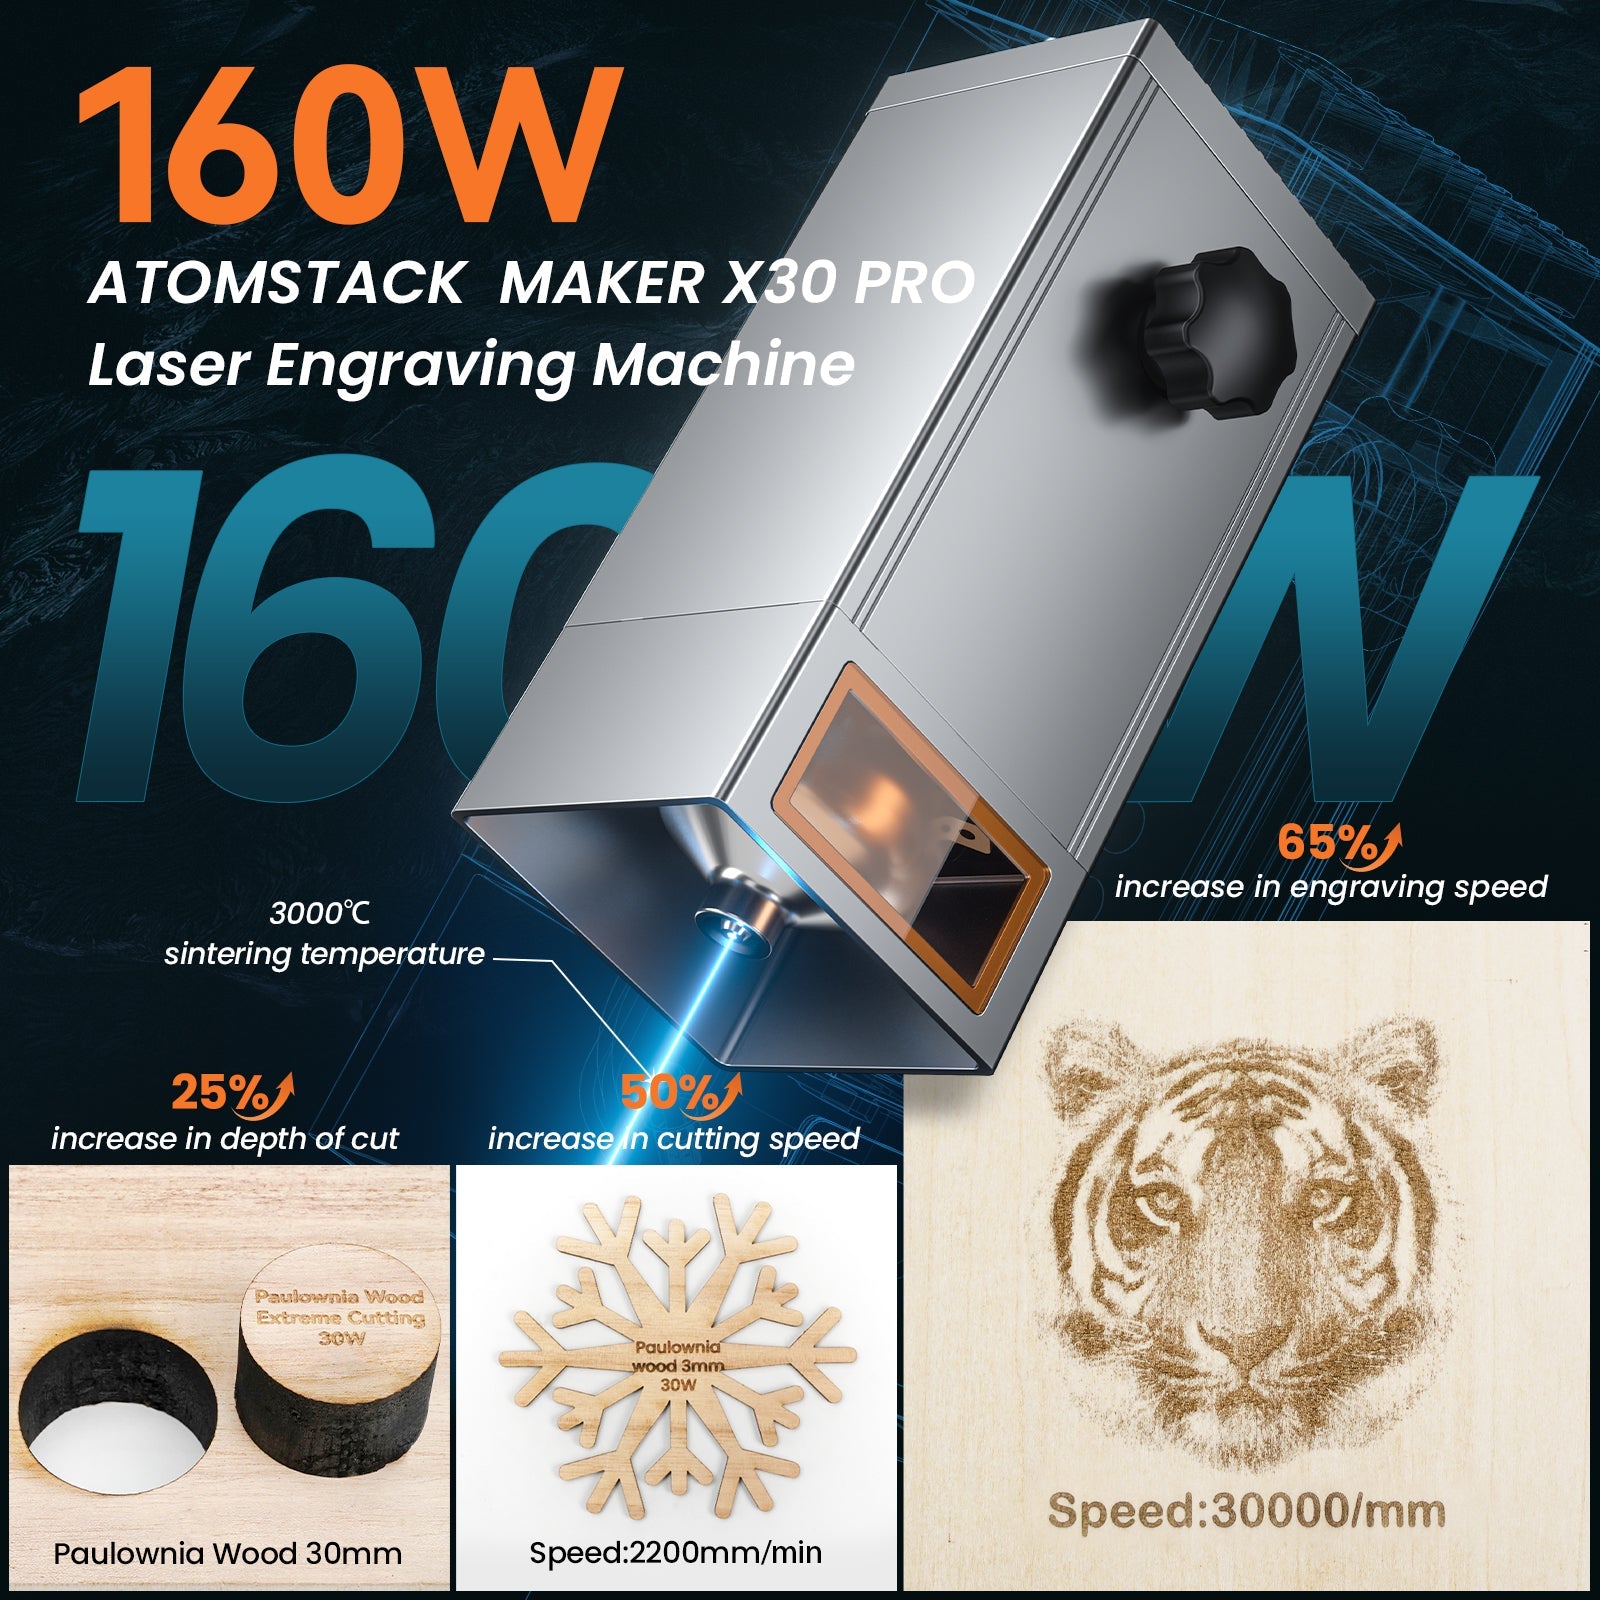 【Refurbished】Atomstack X30 Pro 160W 6-core Laser Engraving and Cutting Machine（99% NEW）